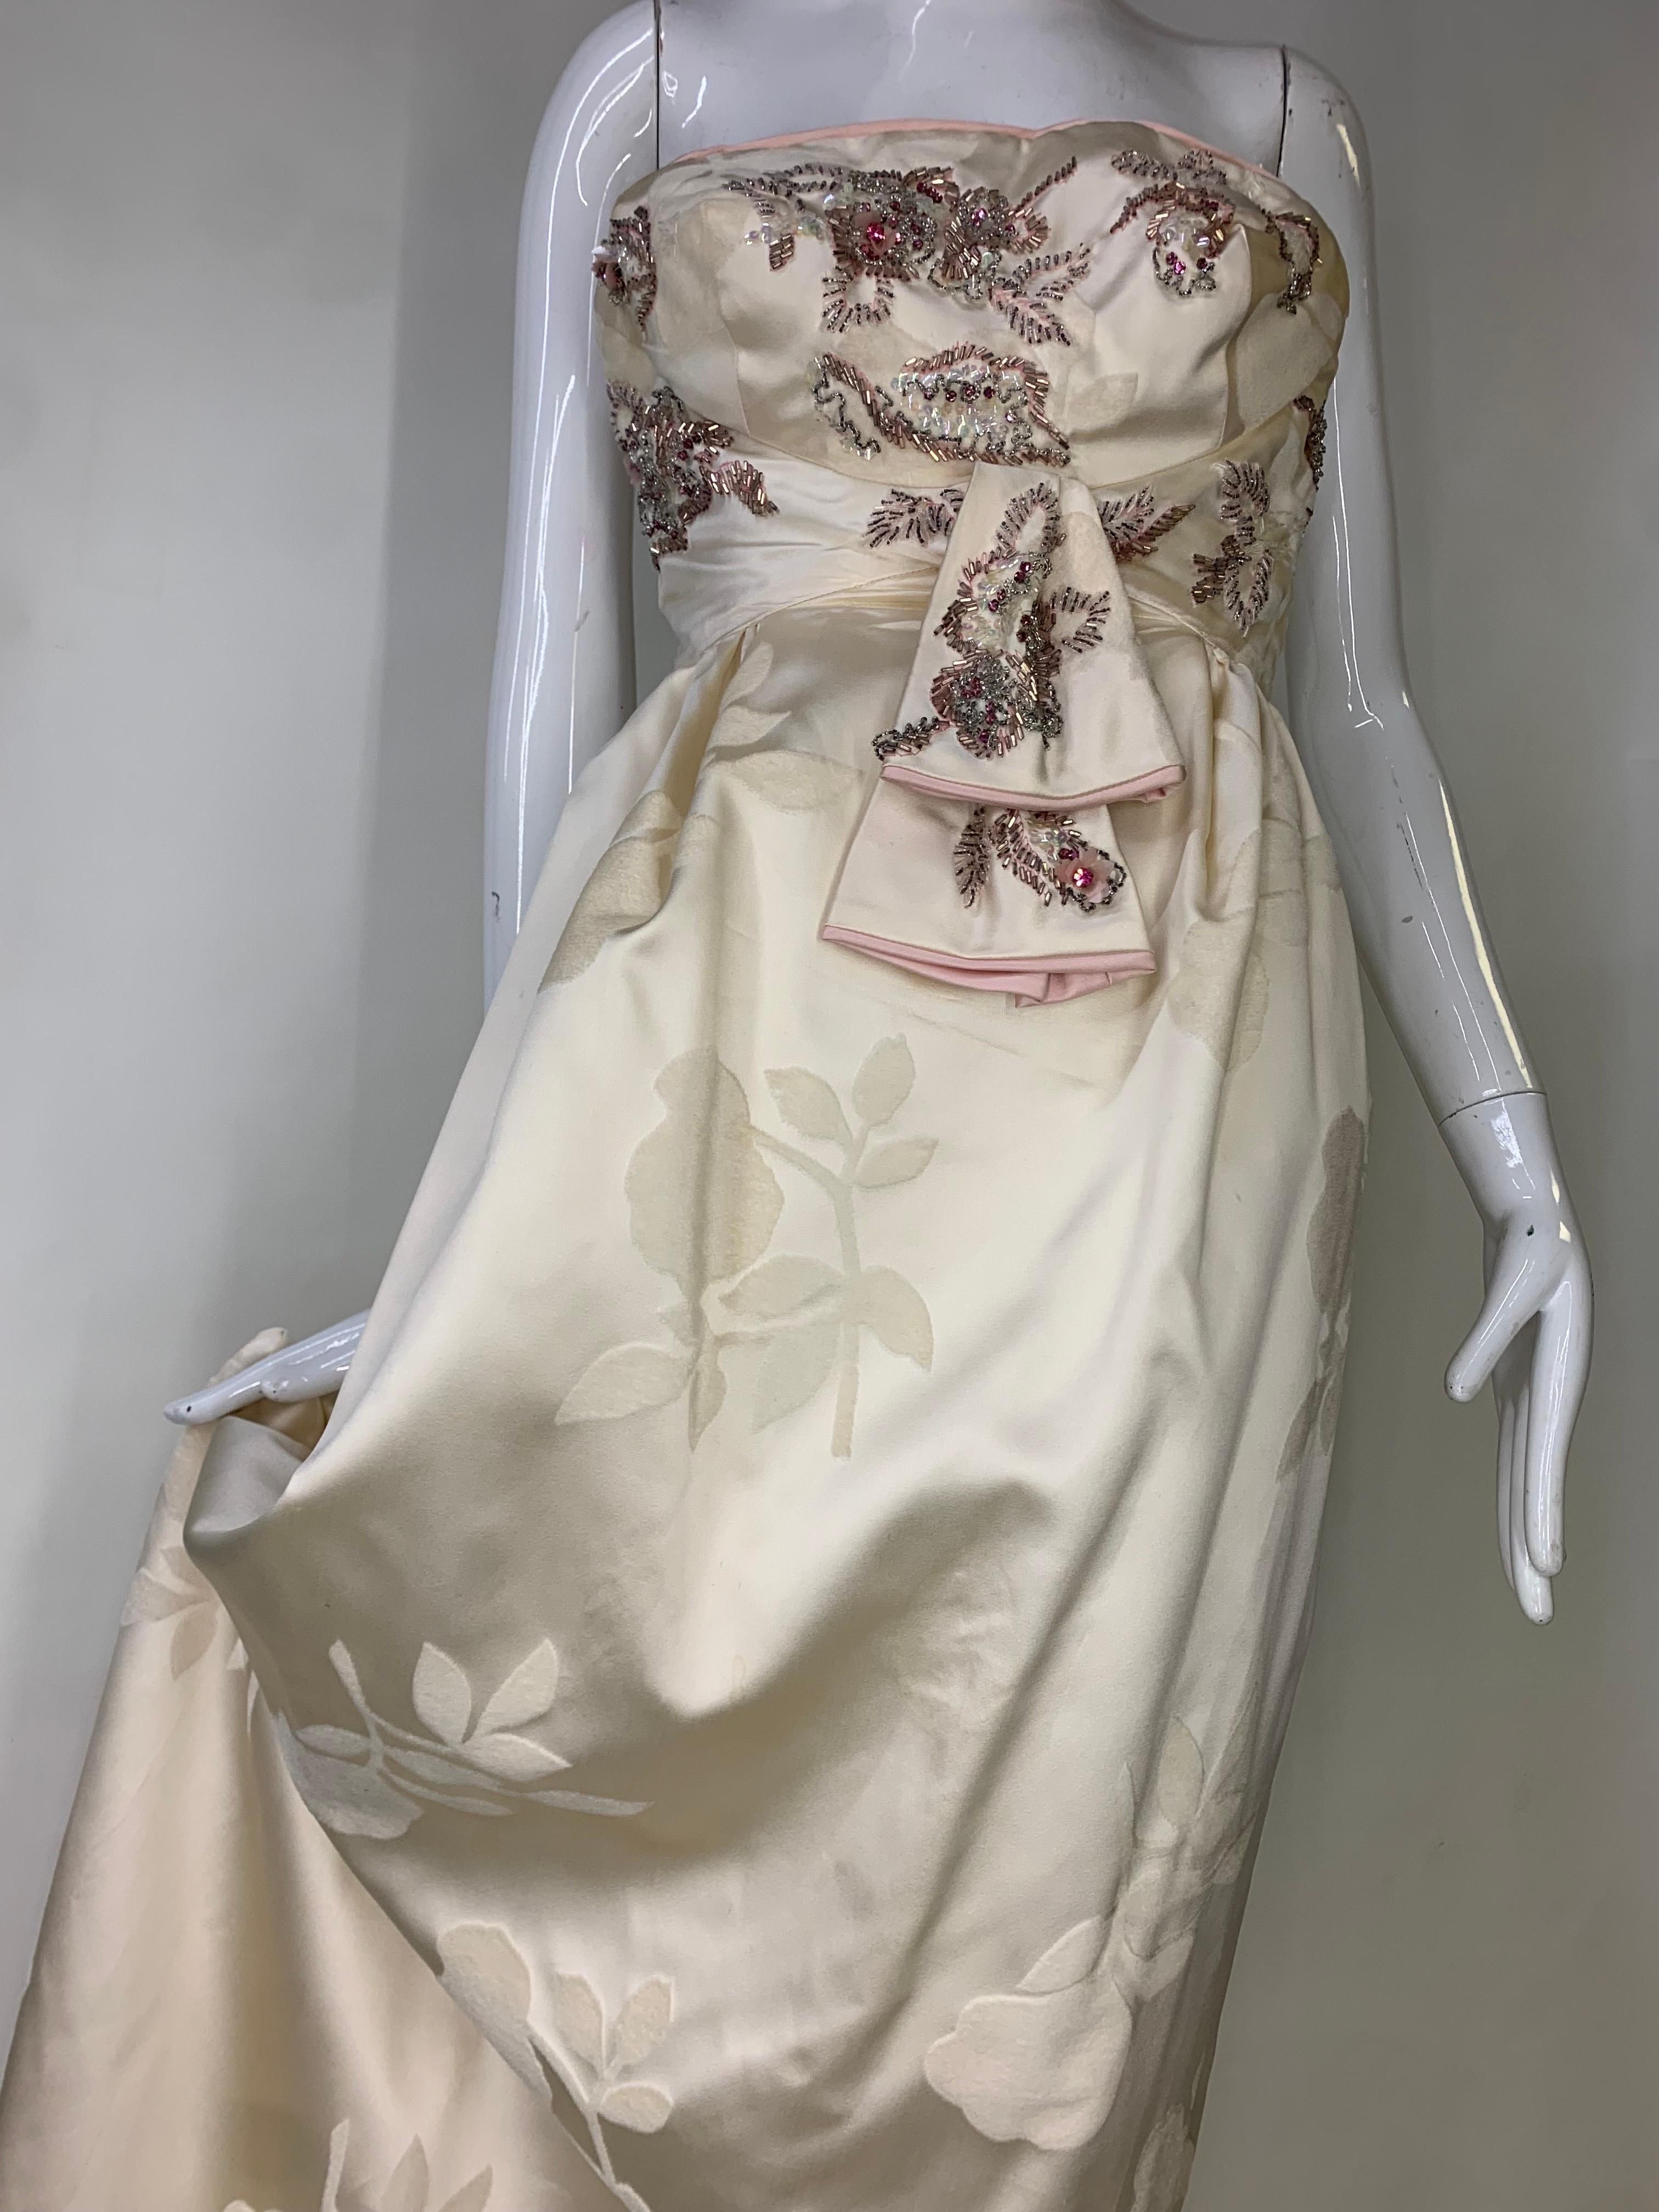 1950s Helena Barbieri Original Cream Silk Flocked Beaded Strapless Gown: A sensual original design features a floral motif beaded and jeweled bodice in a subtle and appealing style accented with pink piping. Sash front waist. Simple gathered skirt